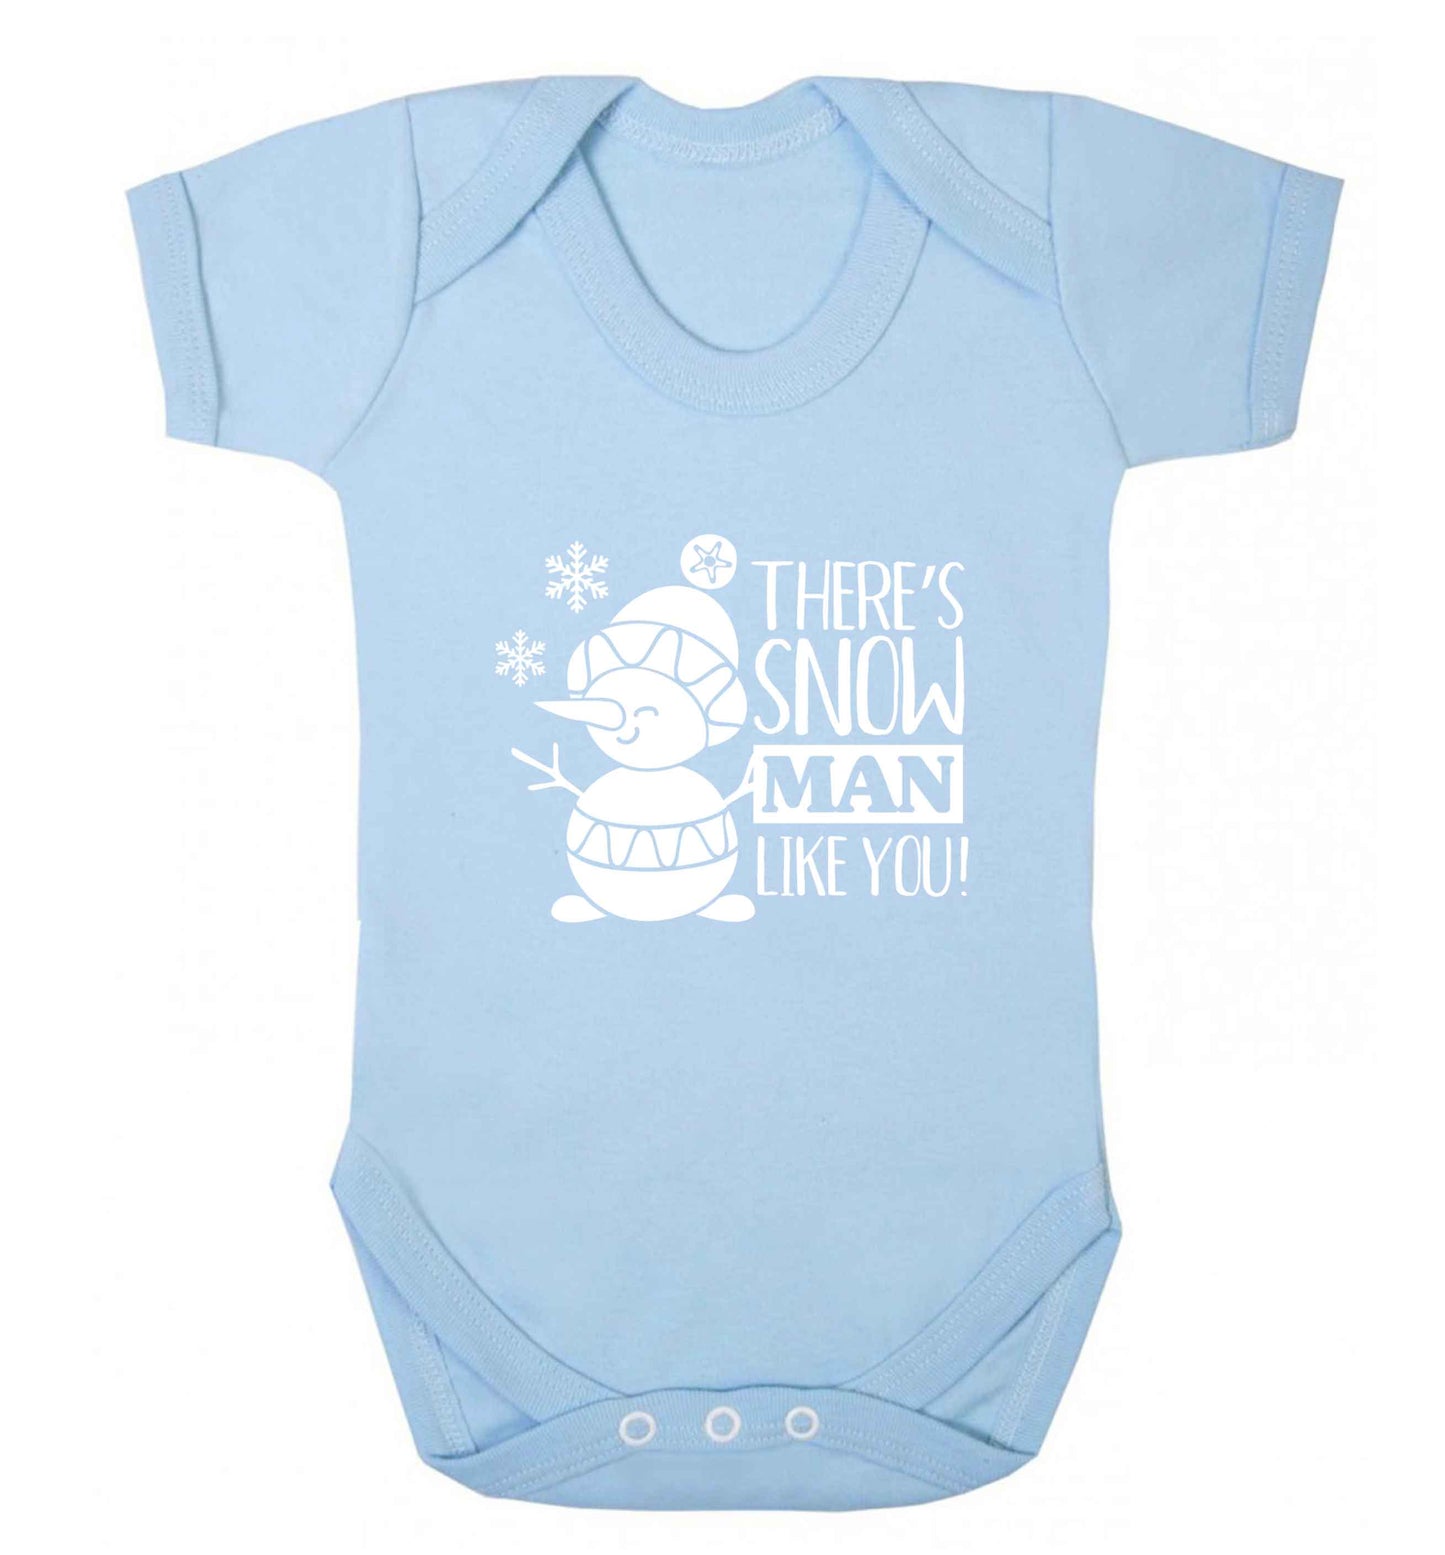 There's snow man like you baby vest pale blue 18-24 months